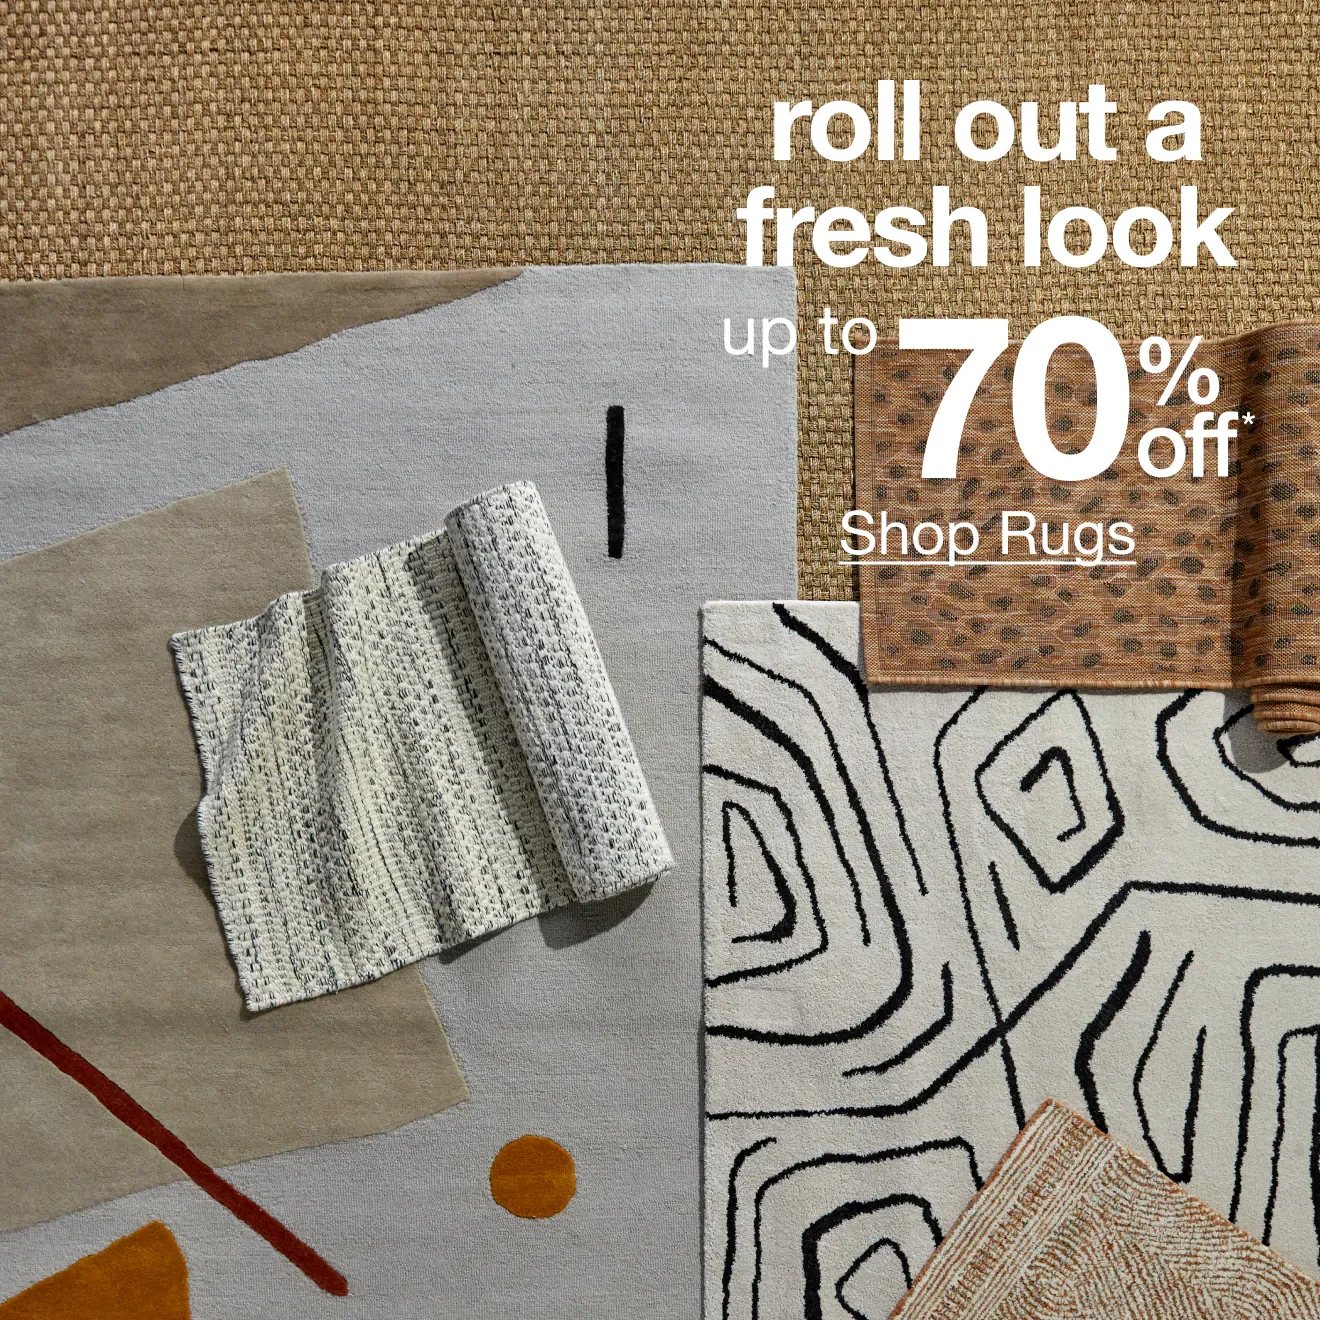 Roll out a fresh look - shop rugs